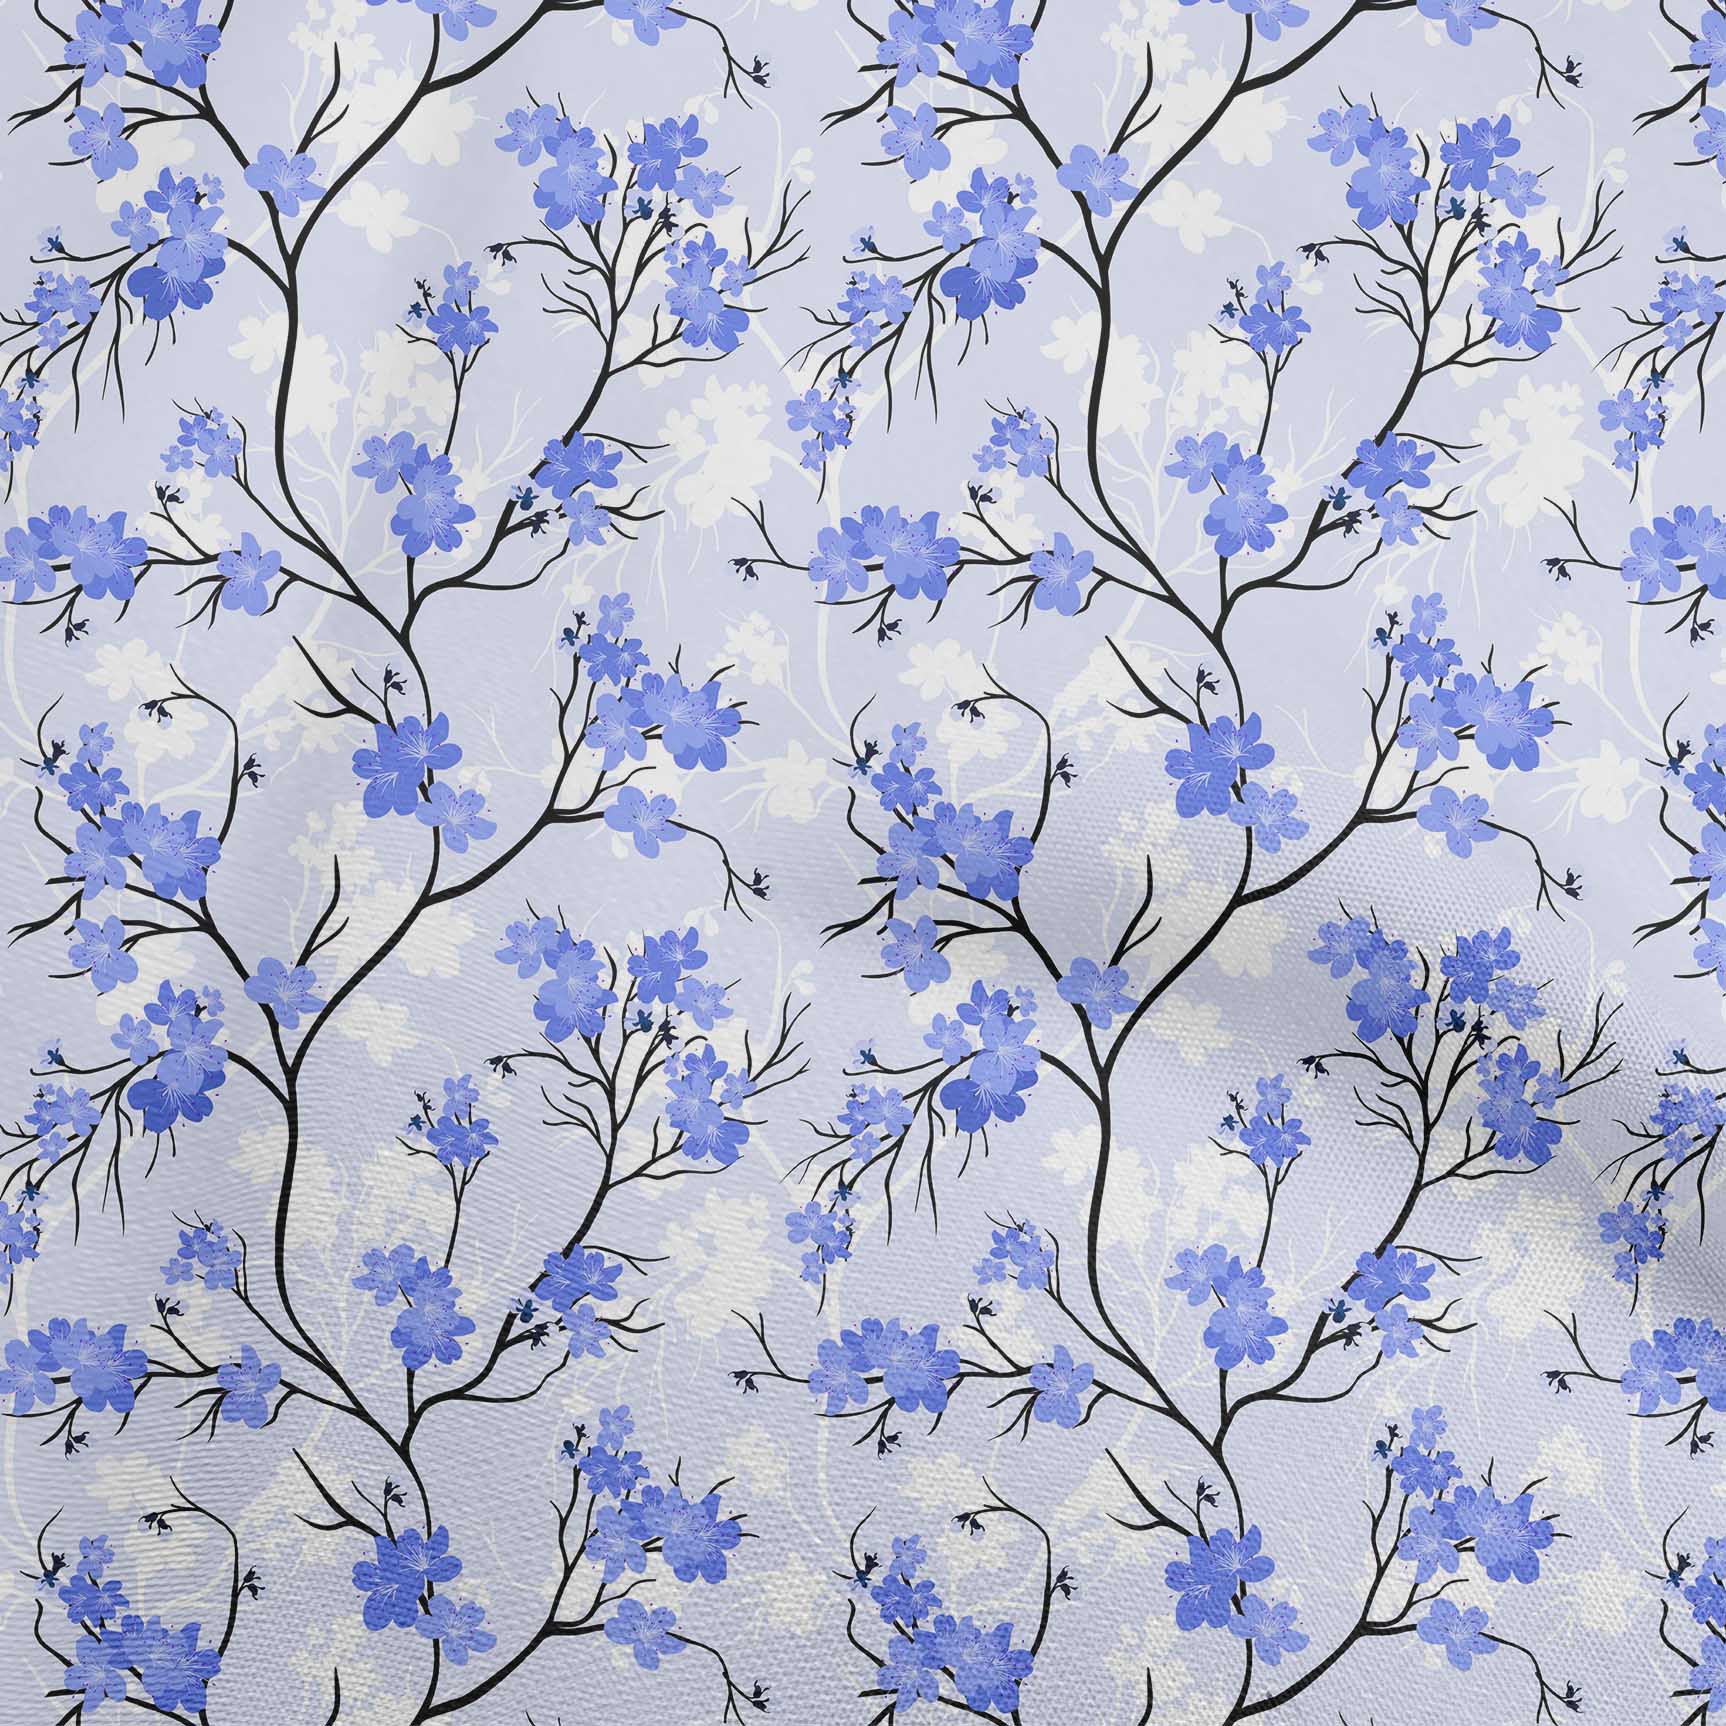 oneOone Viscose Jersey Medium Blue Fabric Floral Fabric For Sewing Printed Craft Fabric By The Yard 60 Inch Wide - image 1 of 1